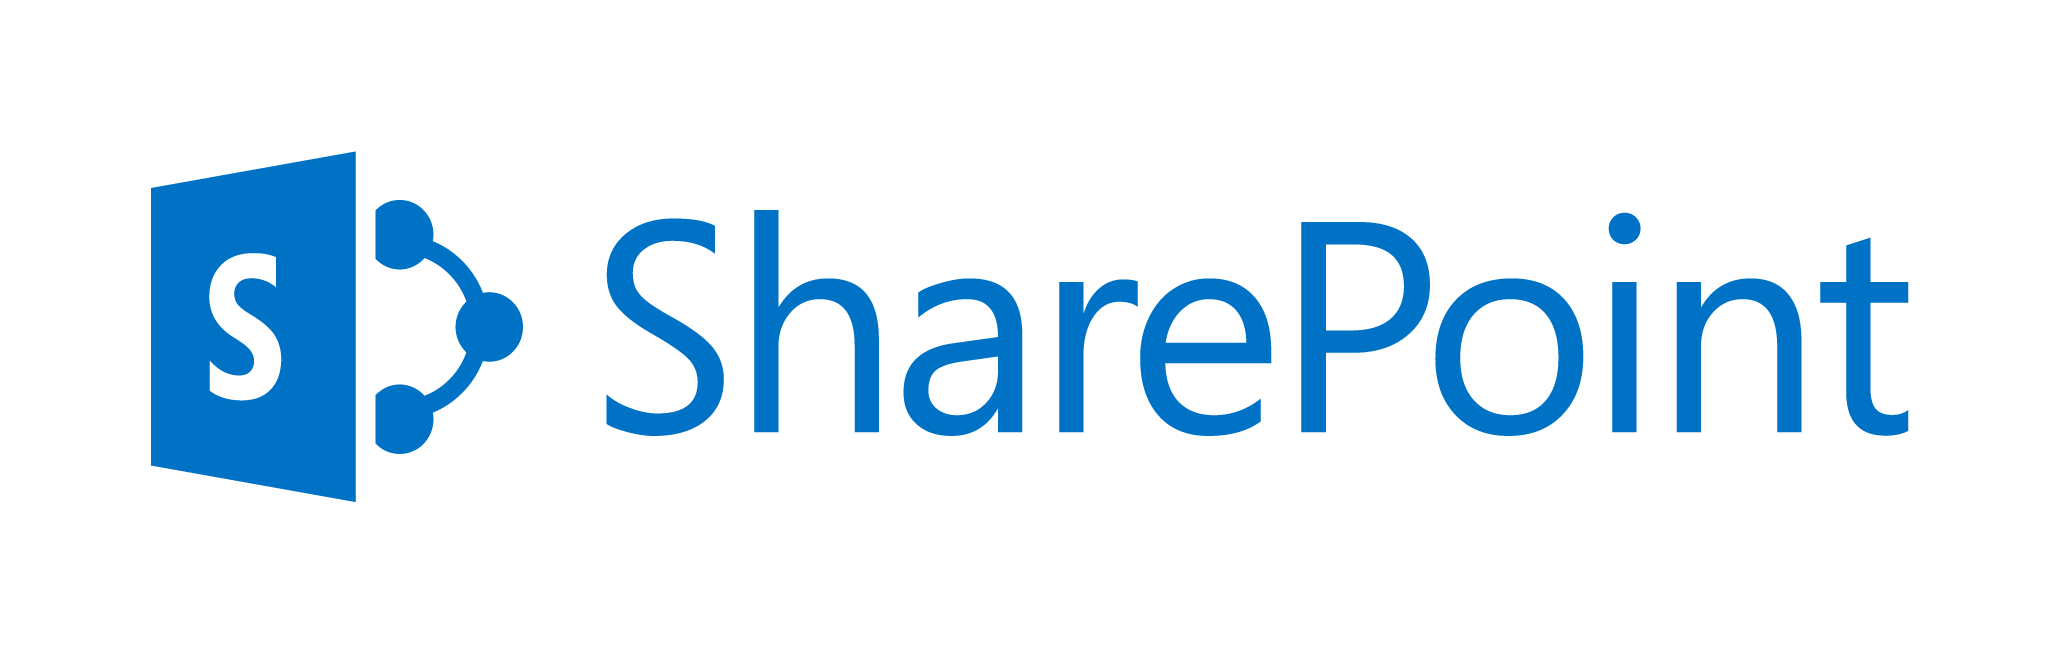 Microsoft Office 365 SharePoint Logo - SharePoint Page MetaData Coming Soon to SharePoint Office 365